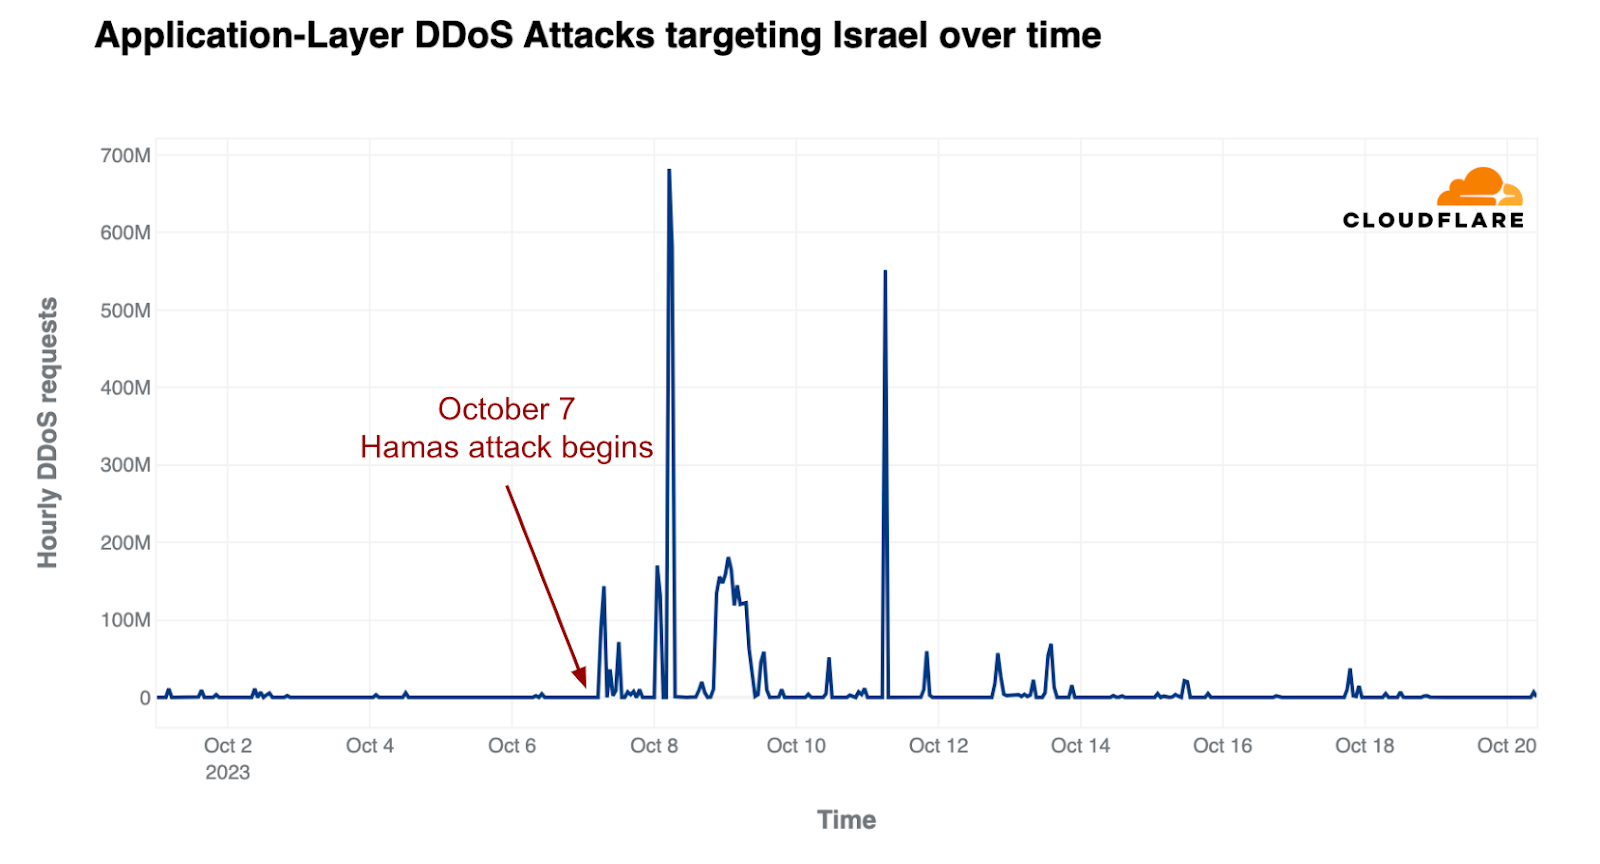 From Cyber Security News – Cloudflare Observed The Peak DDOS Attack of 201 Million HTTP Requests Per Second 